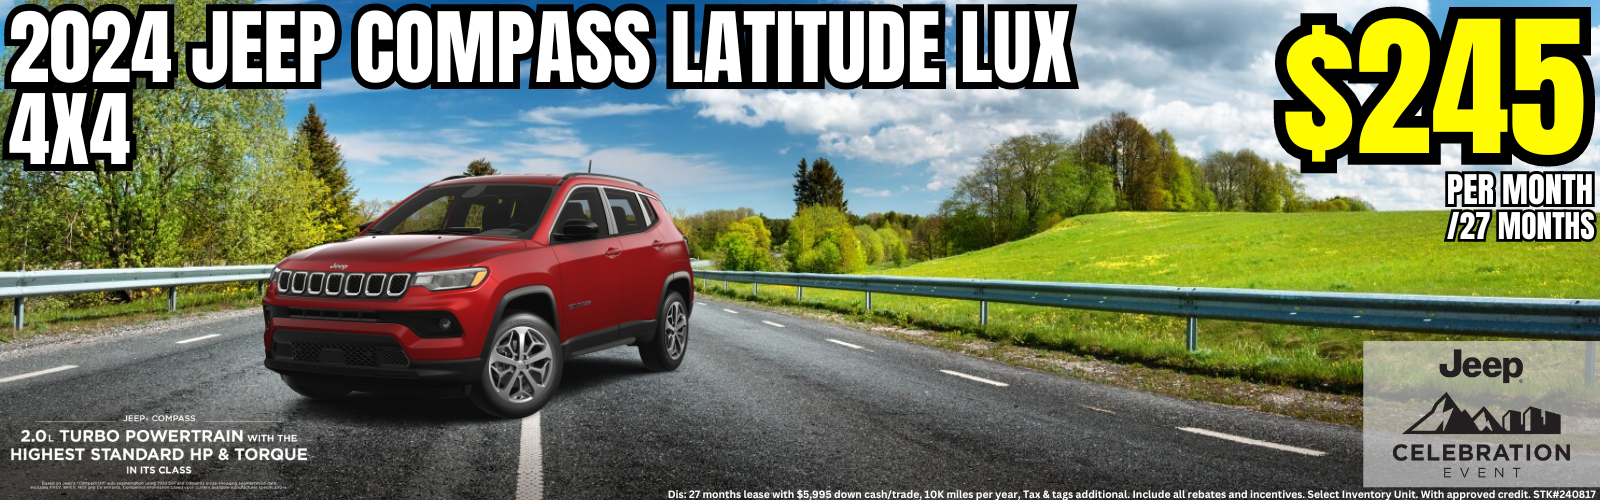 Jeep Compass Latitude Lux - Lease Special